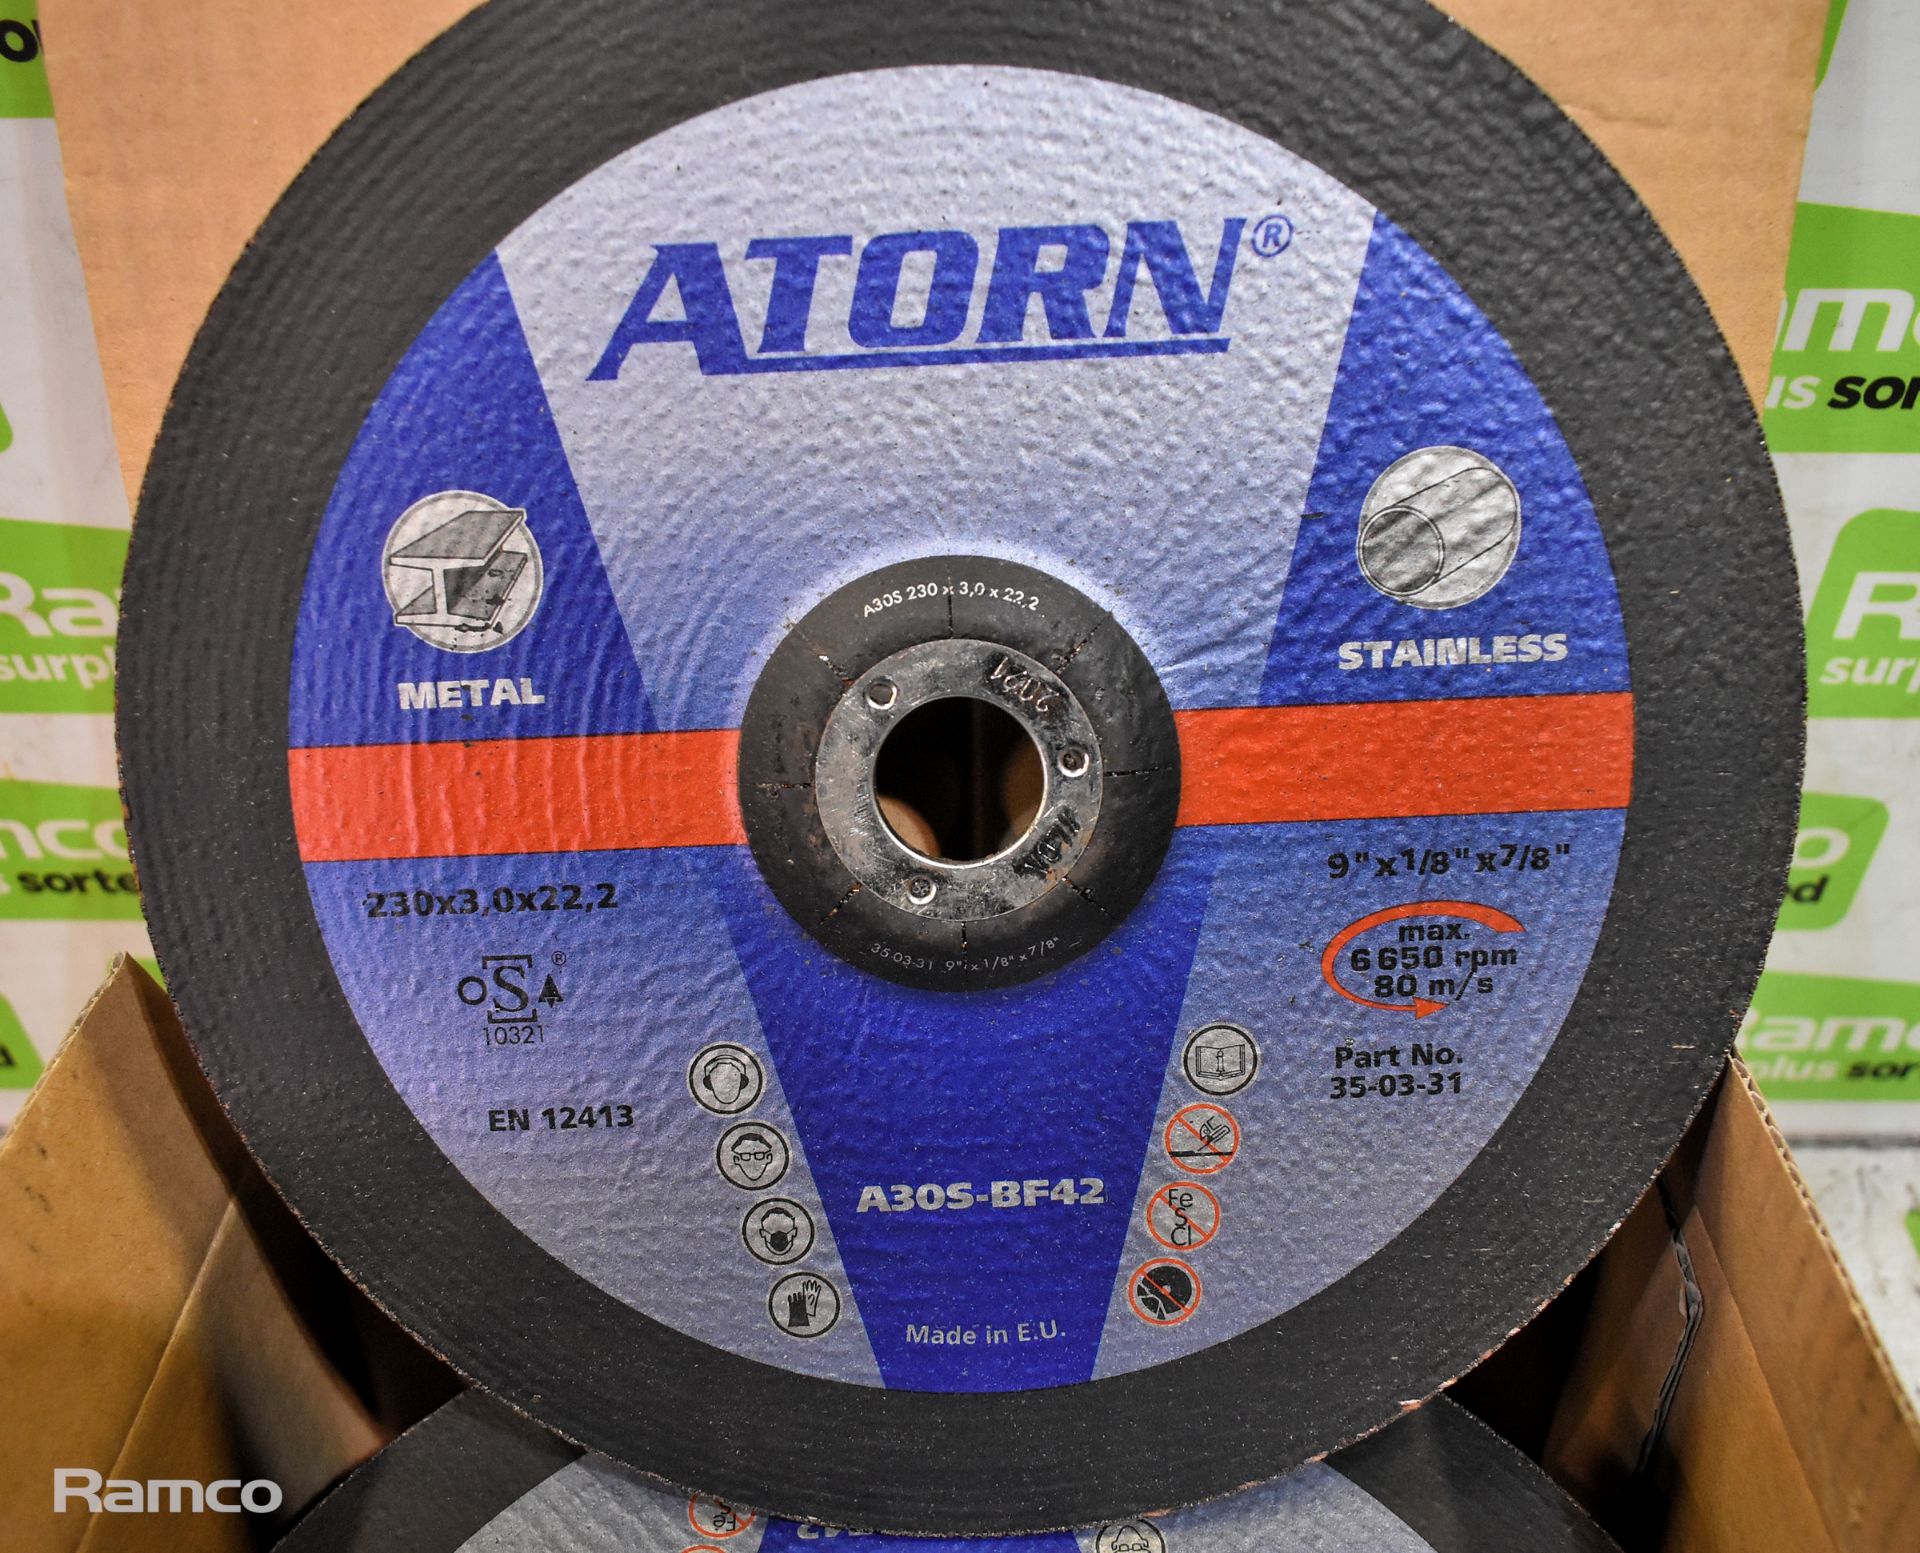 25x ATORN A30S-BF42 metal stainless cutting disc 230x 3,0 x 22,2 - Image 2 of 2